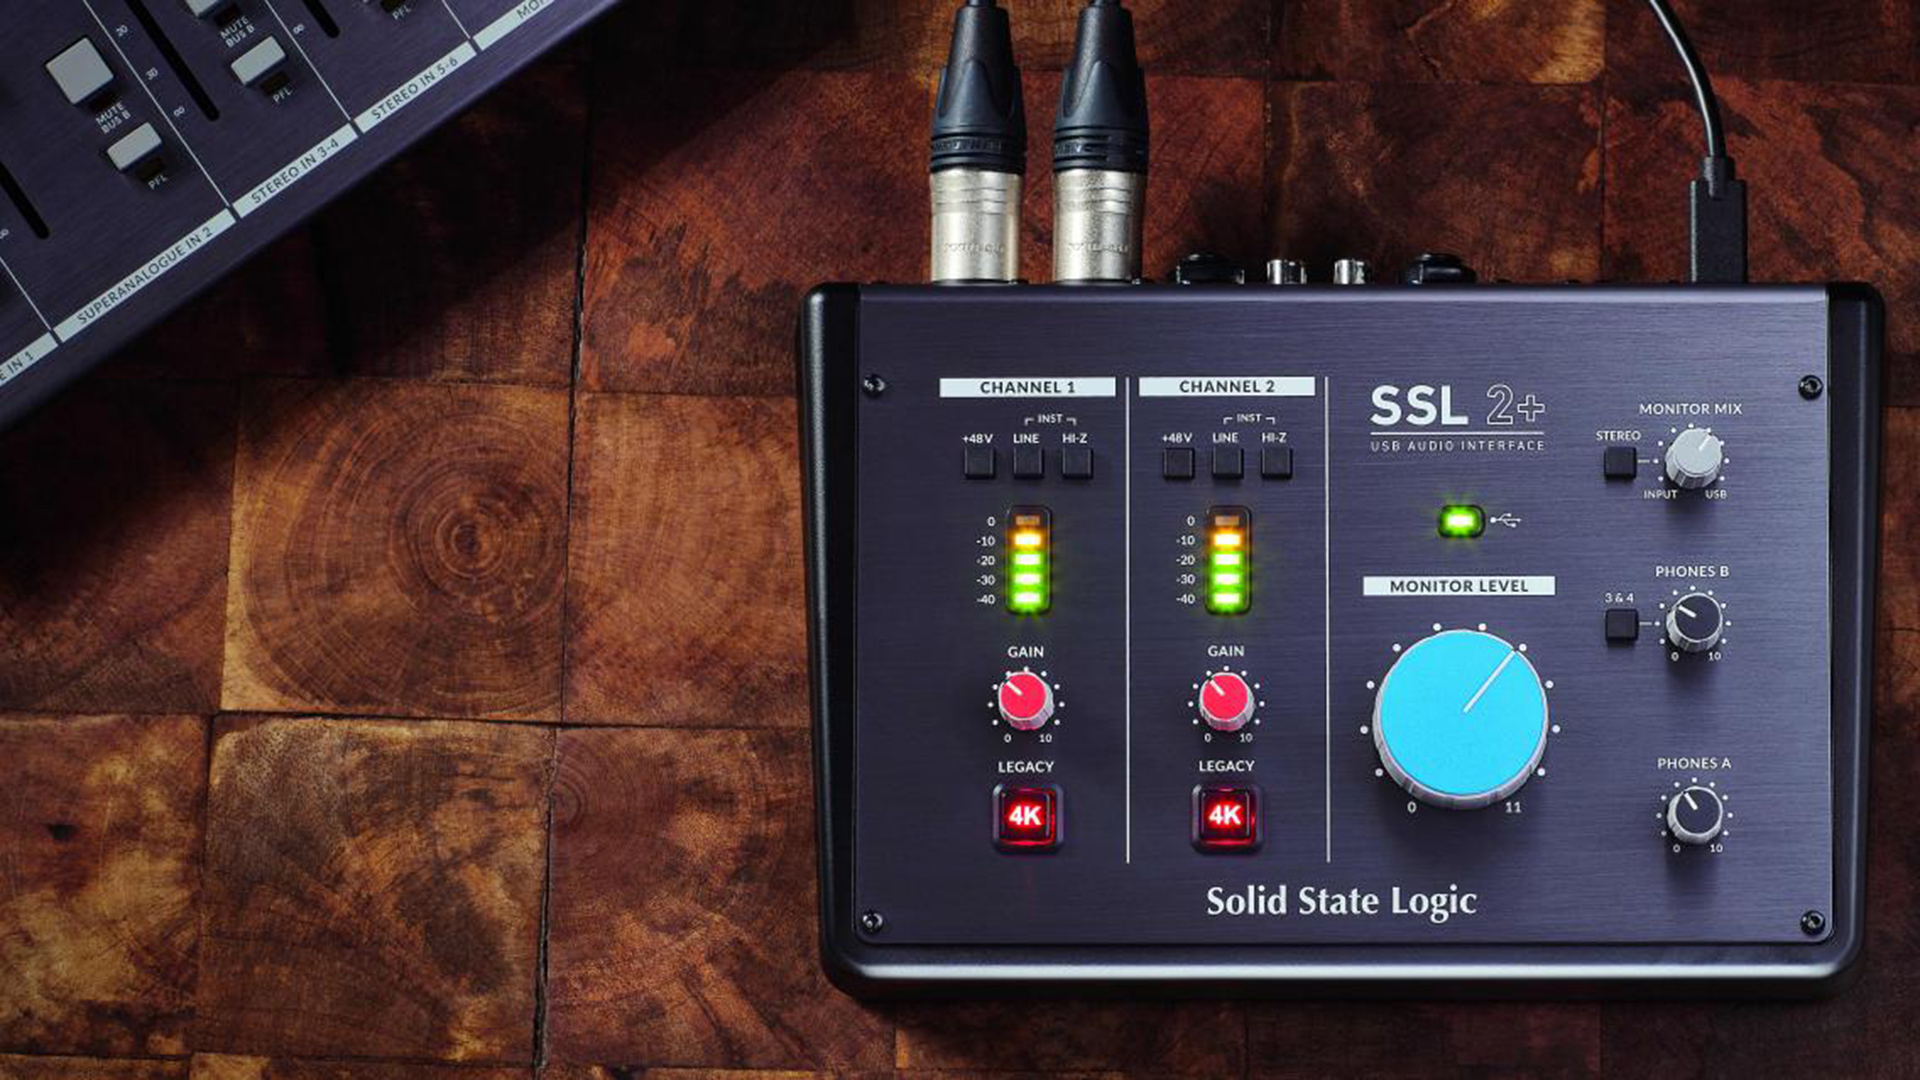 SSL 2+ is a chunky professional audio interface with the